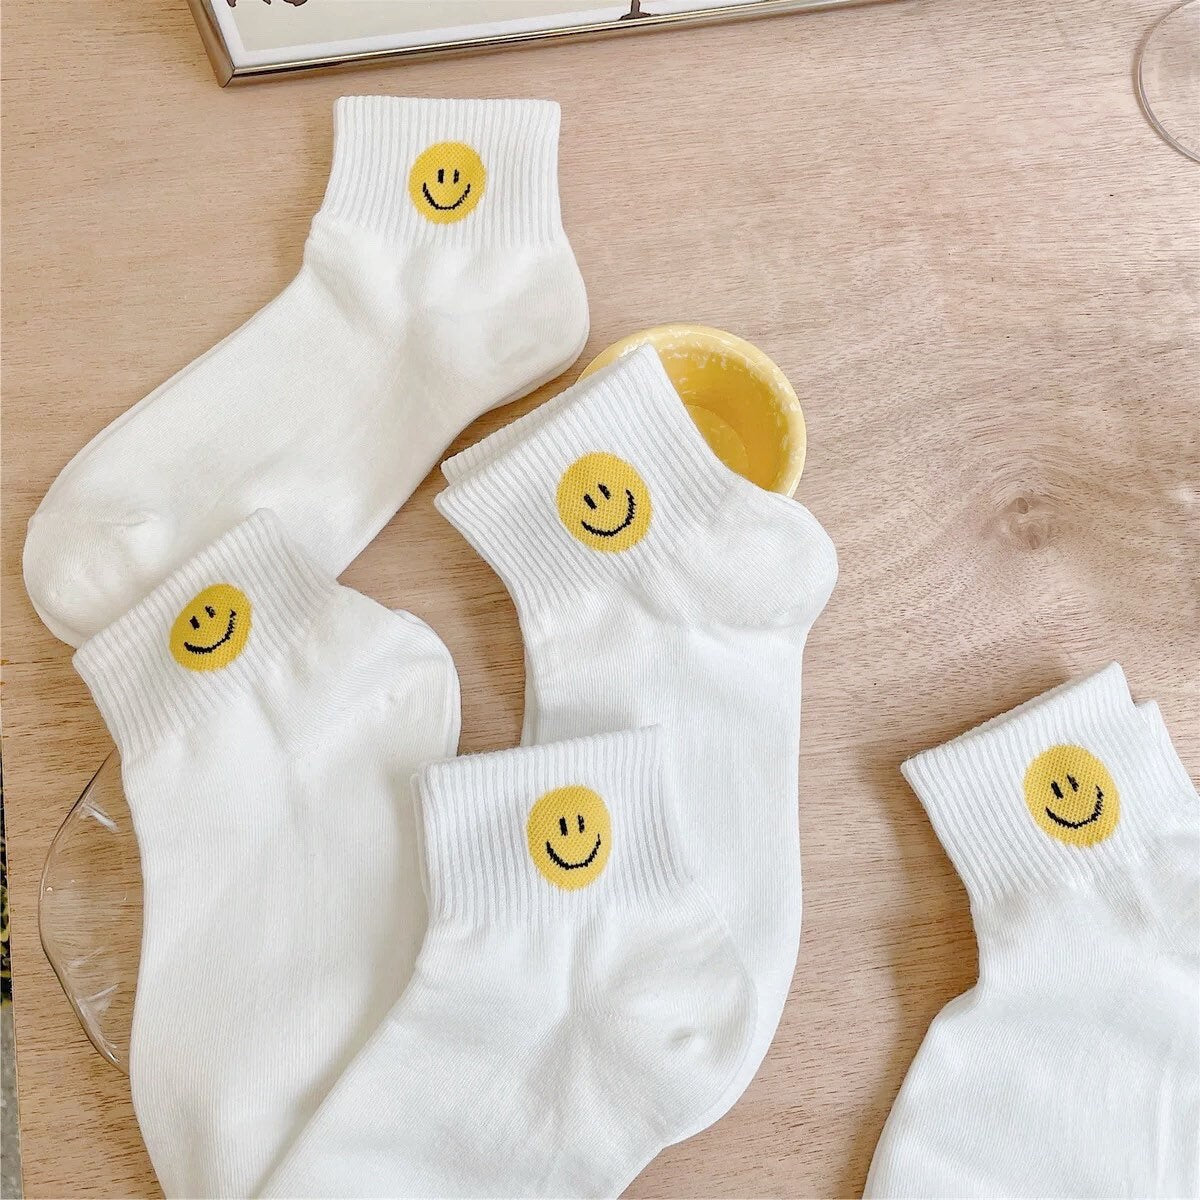 Miss June’s | 1 pair cotton socks｜Daily | Creative | Ankle | Designed | Cute | Gift Idea | Casual | Cool | Comfortable | Women’s